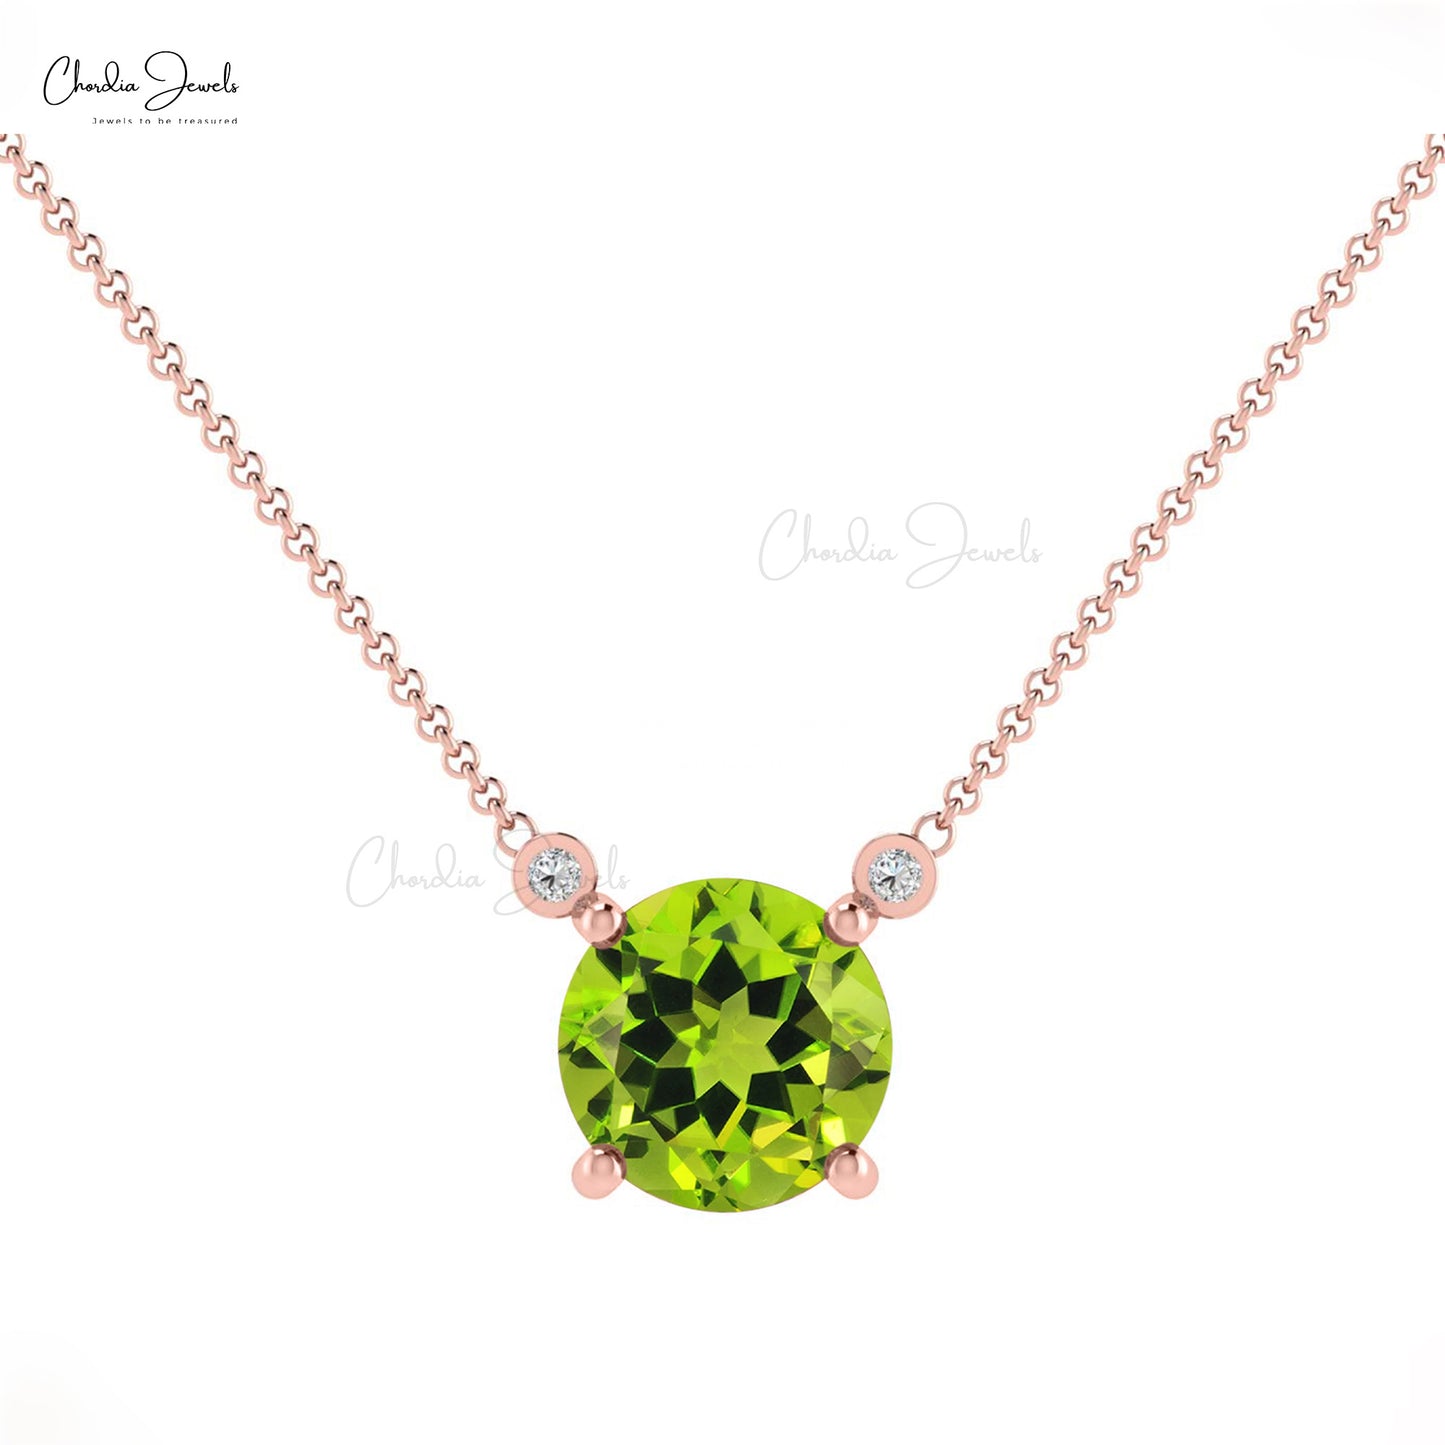 Solitaire Necklace With Genuine Peridot & Diamond Accents 14k Solid Gold Prong Set Birthstone Necklace